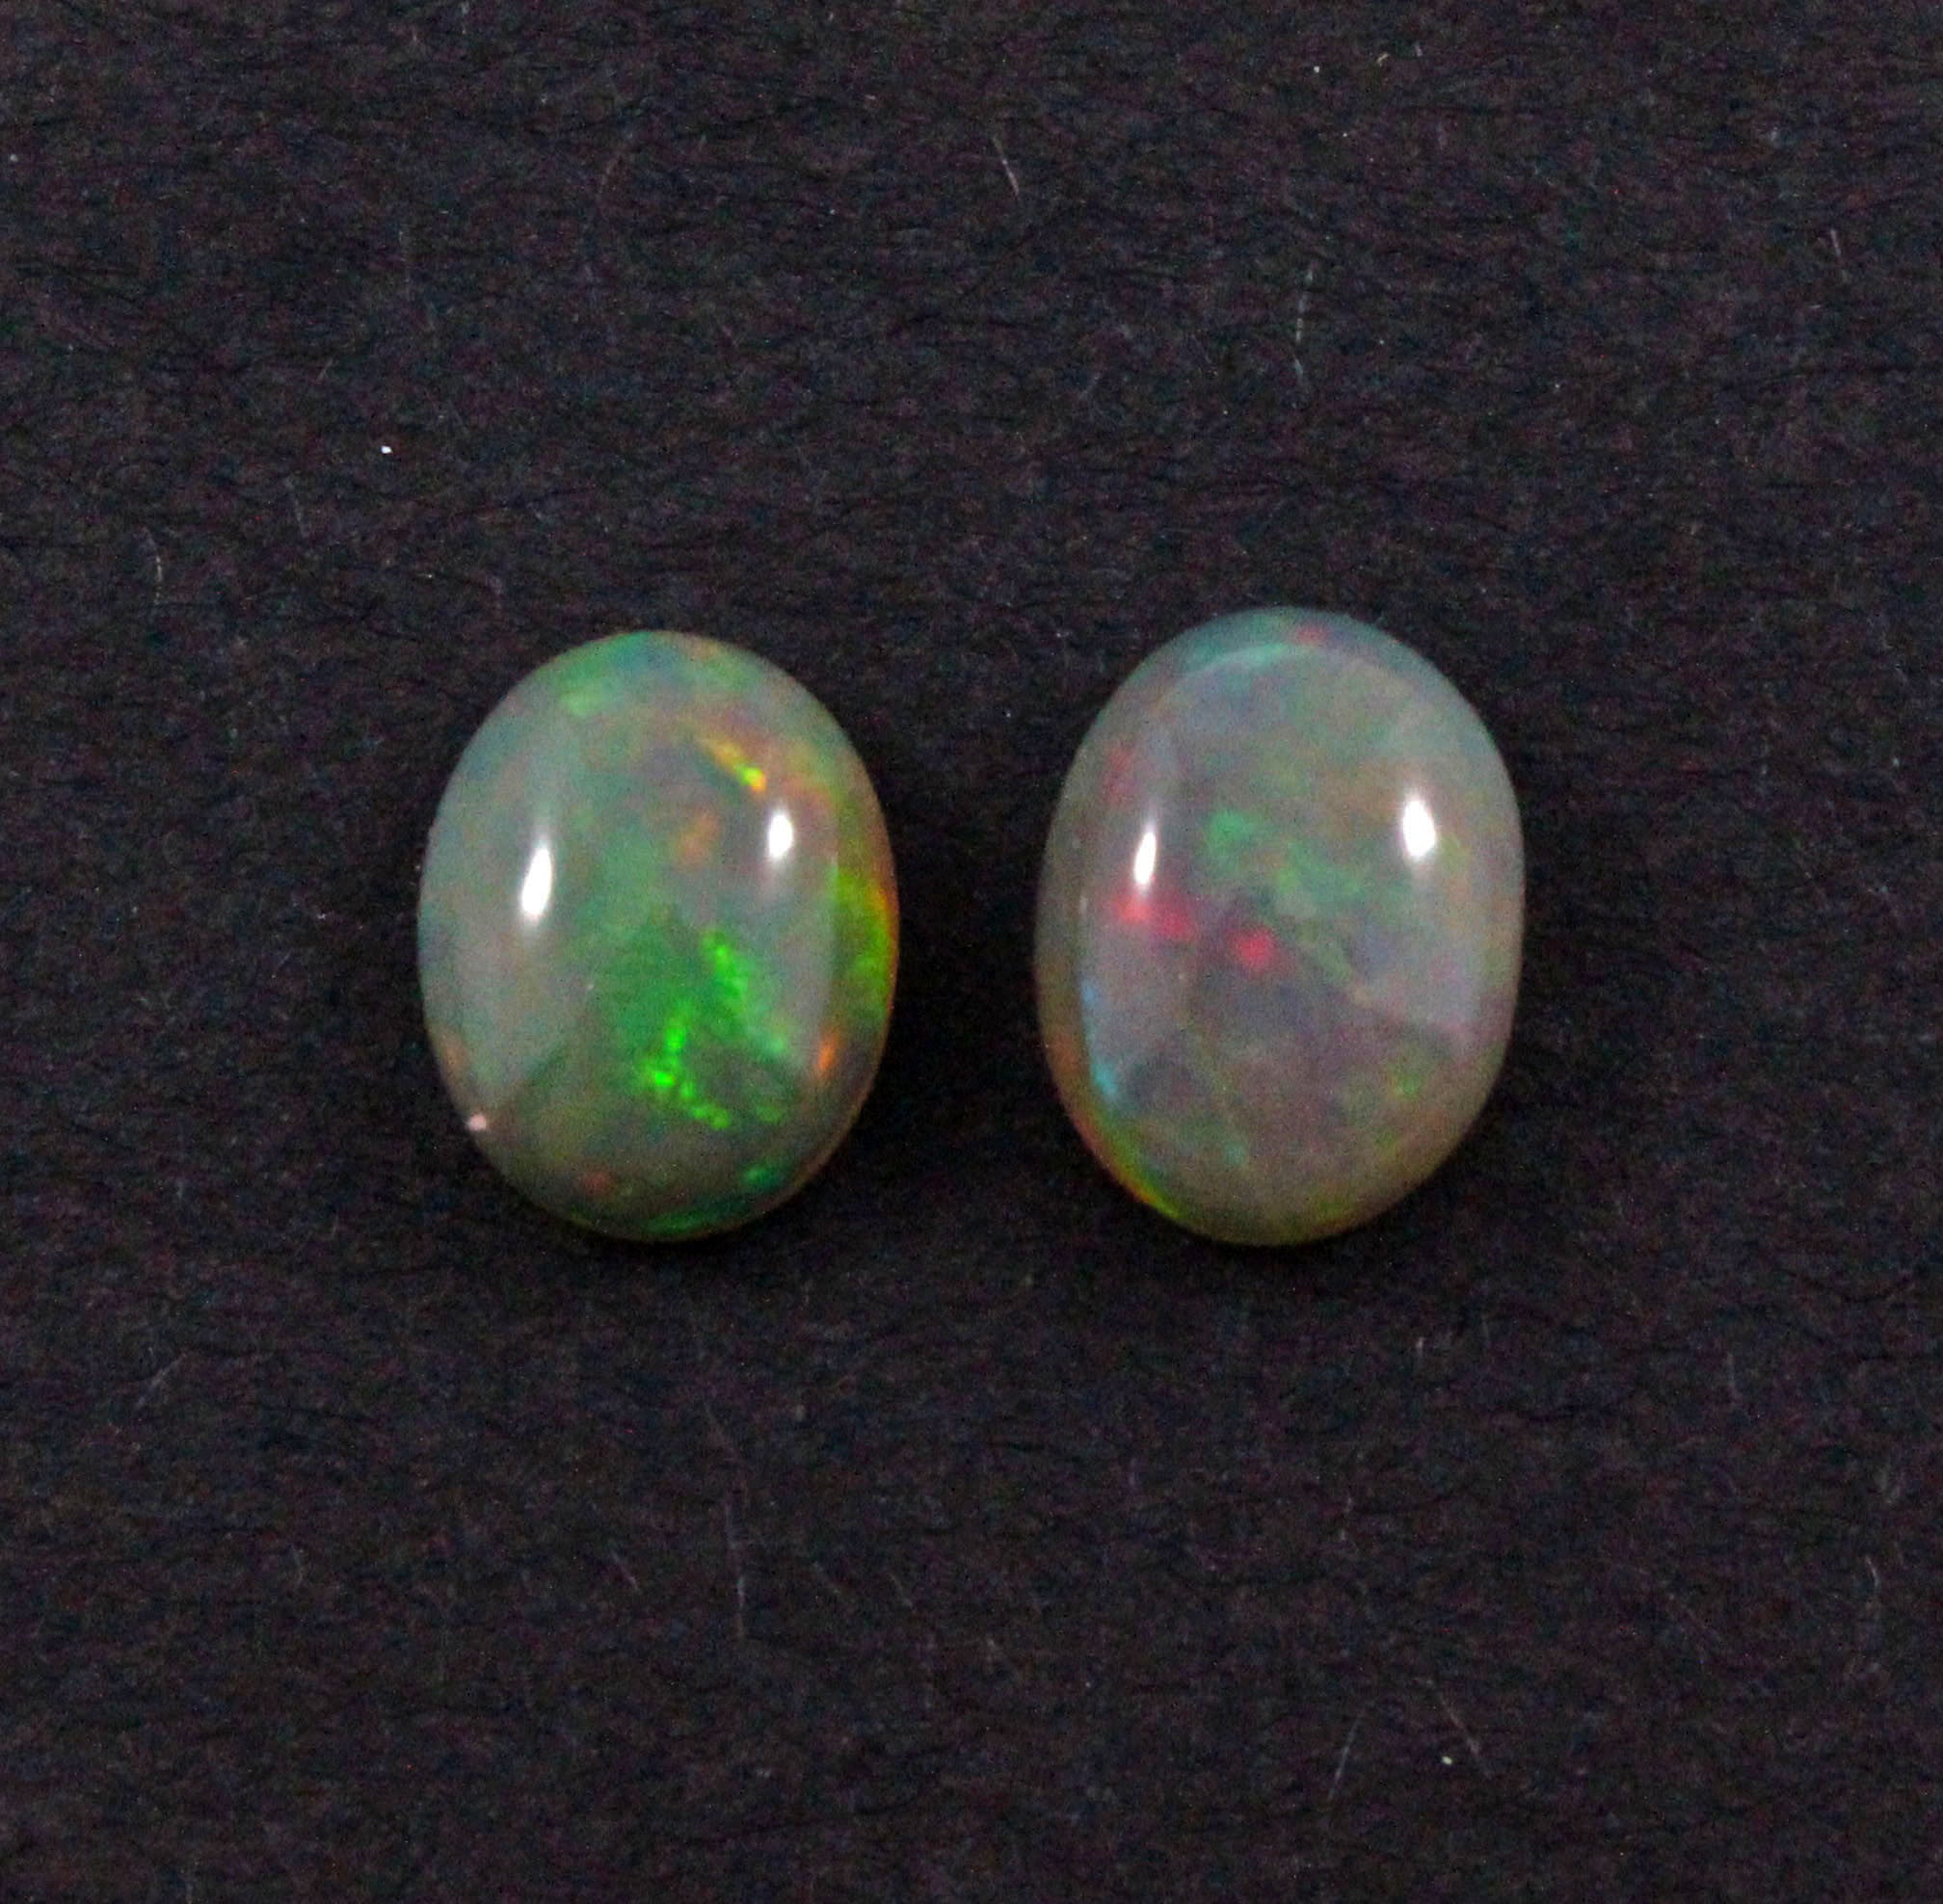 Australian jelly opal matched pair 3.16 carat total loose gemstone - Purchase only with custom order - Sarah Hughes - 2